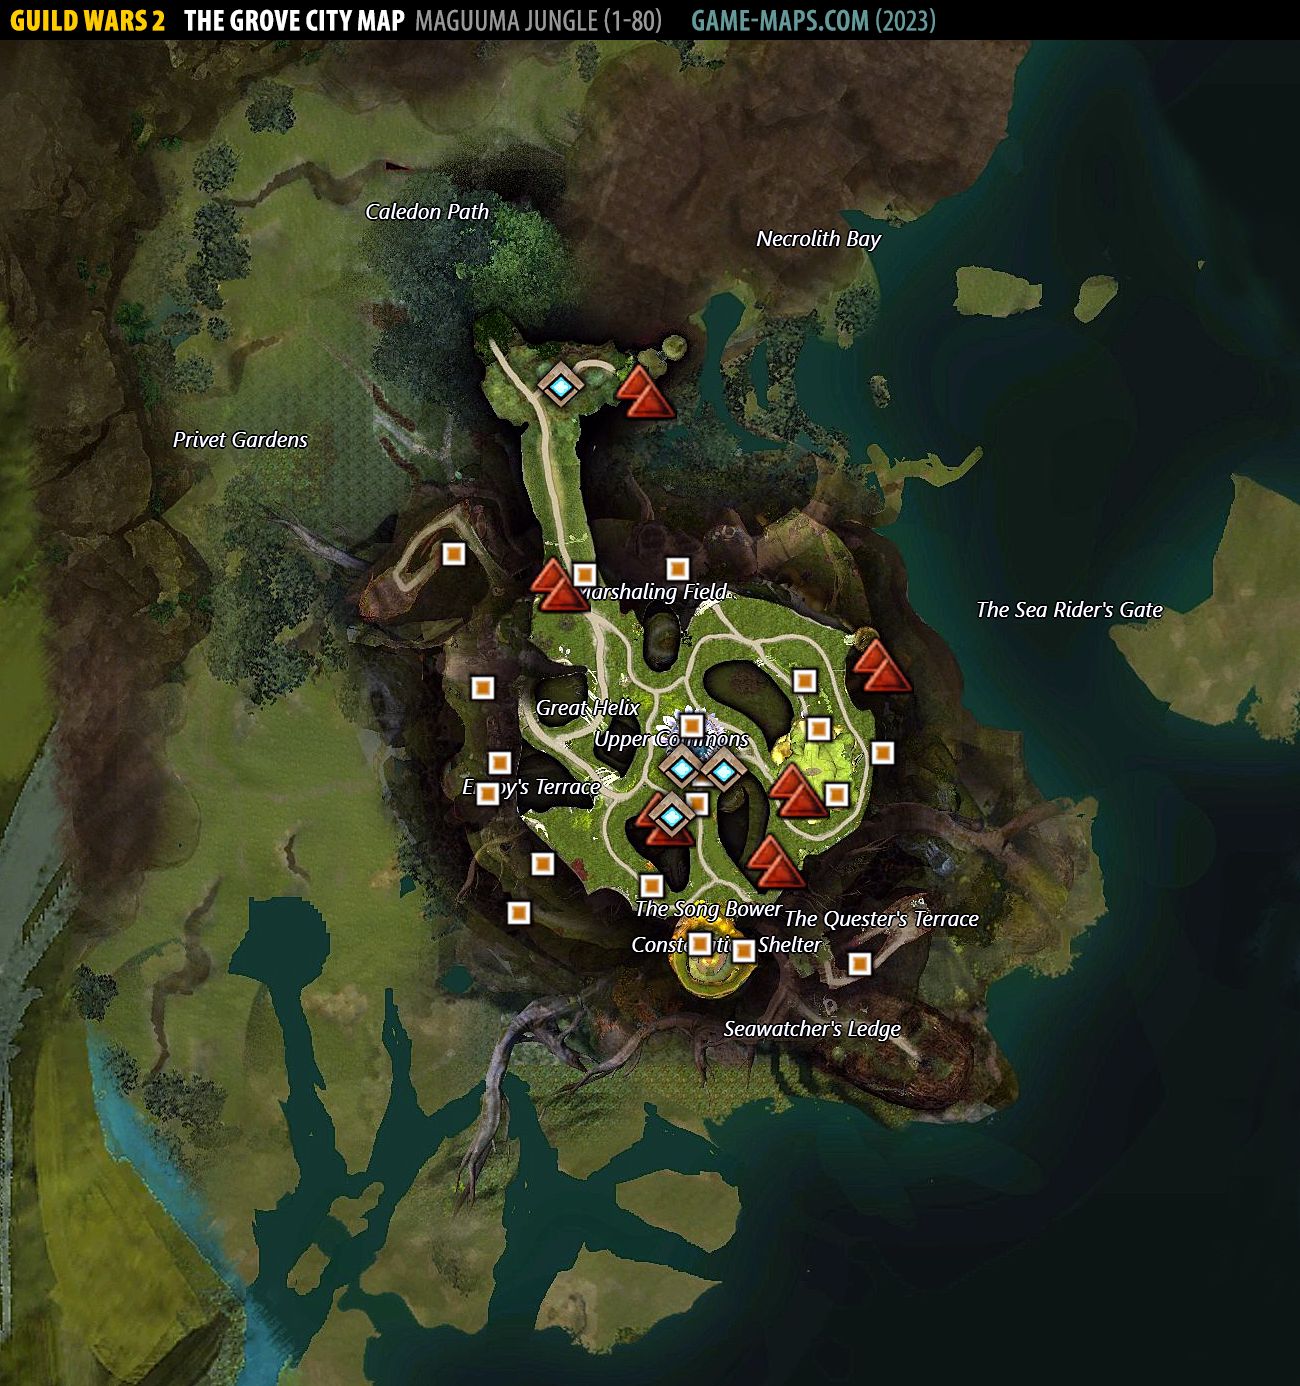 The Grove City Map Guild Wars 2